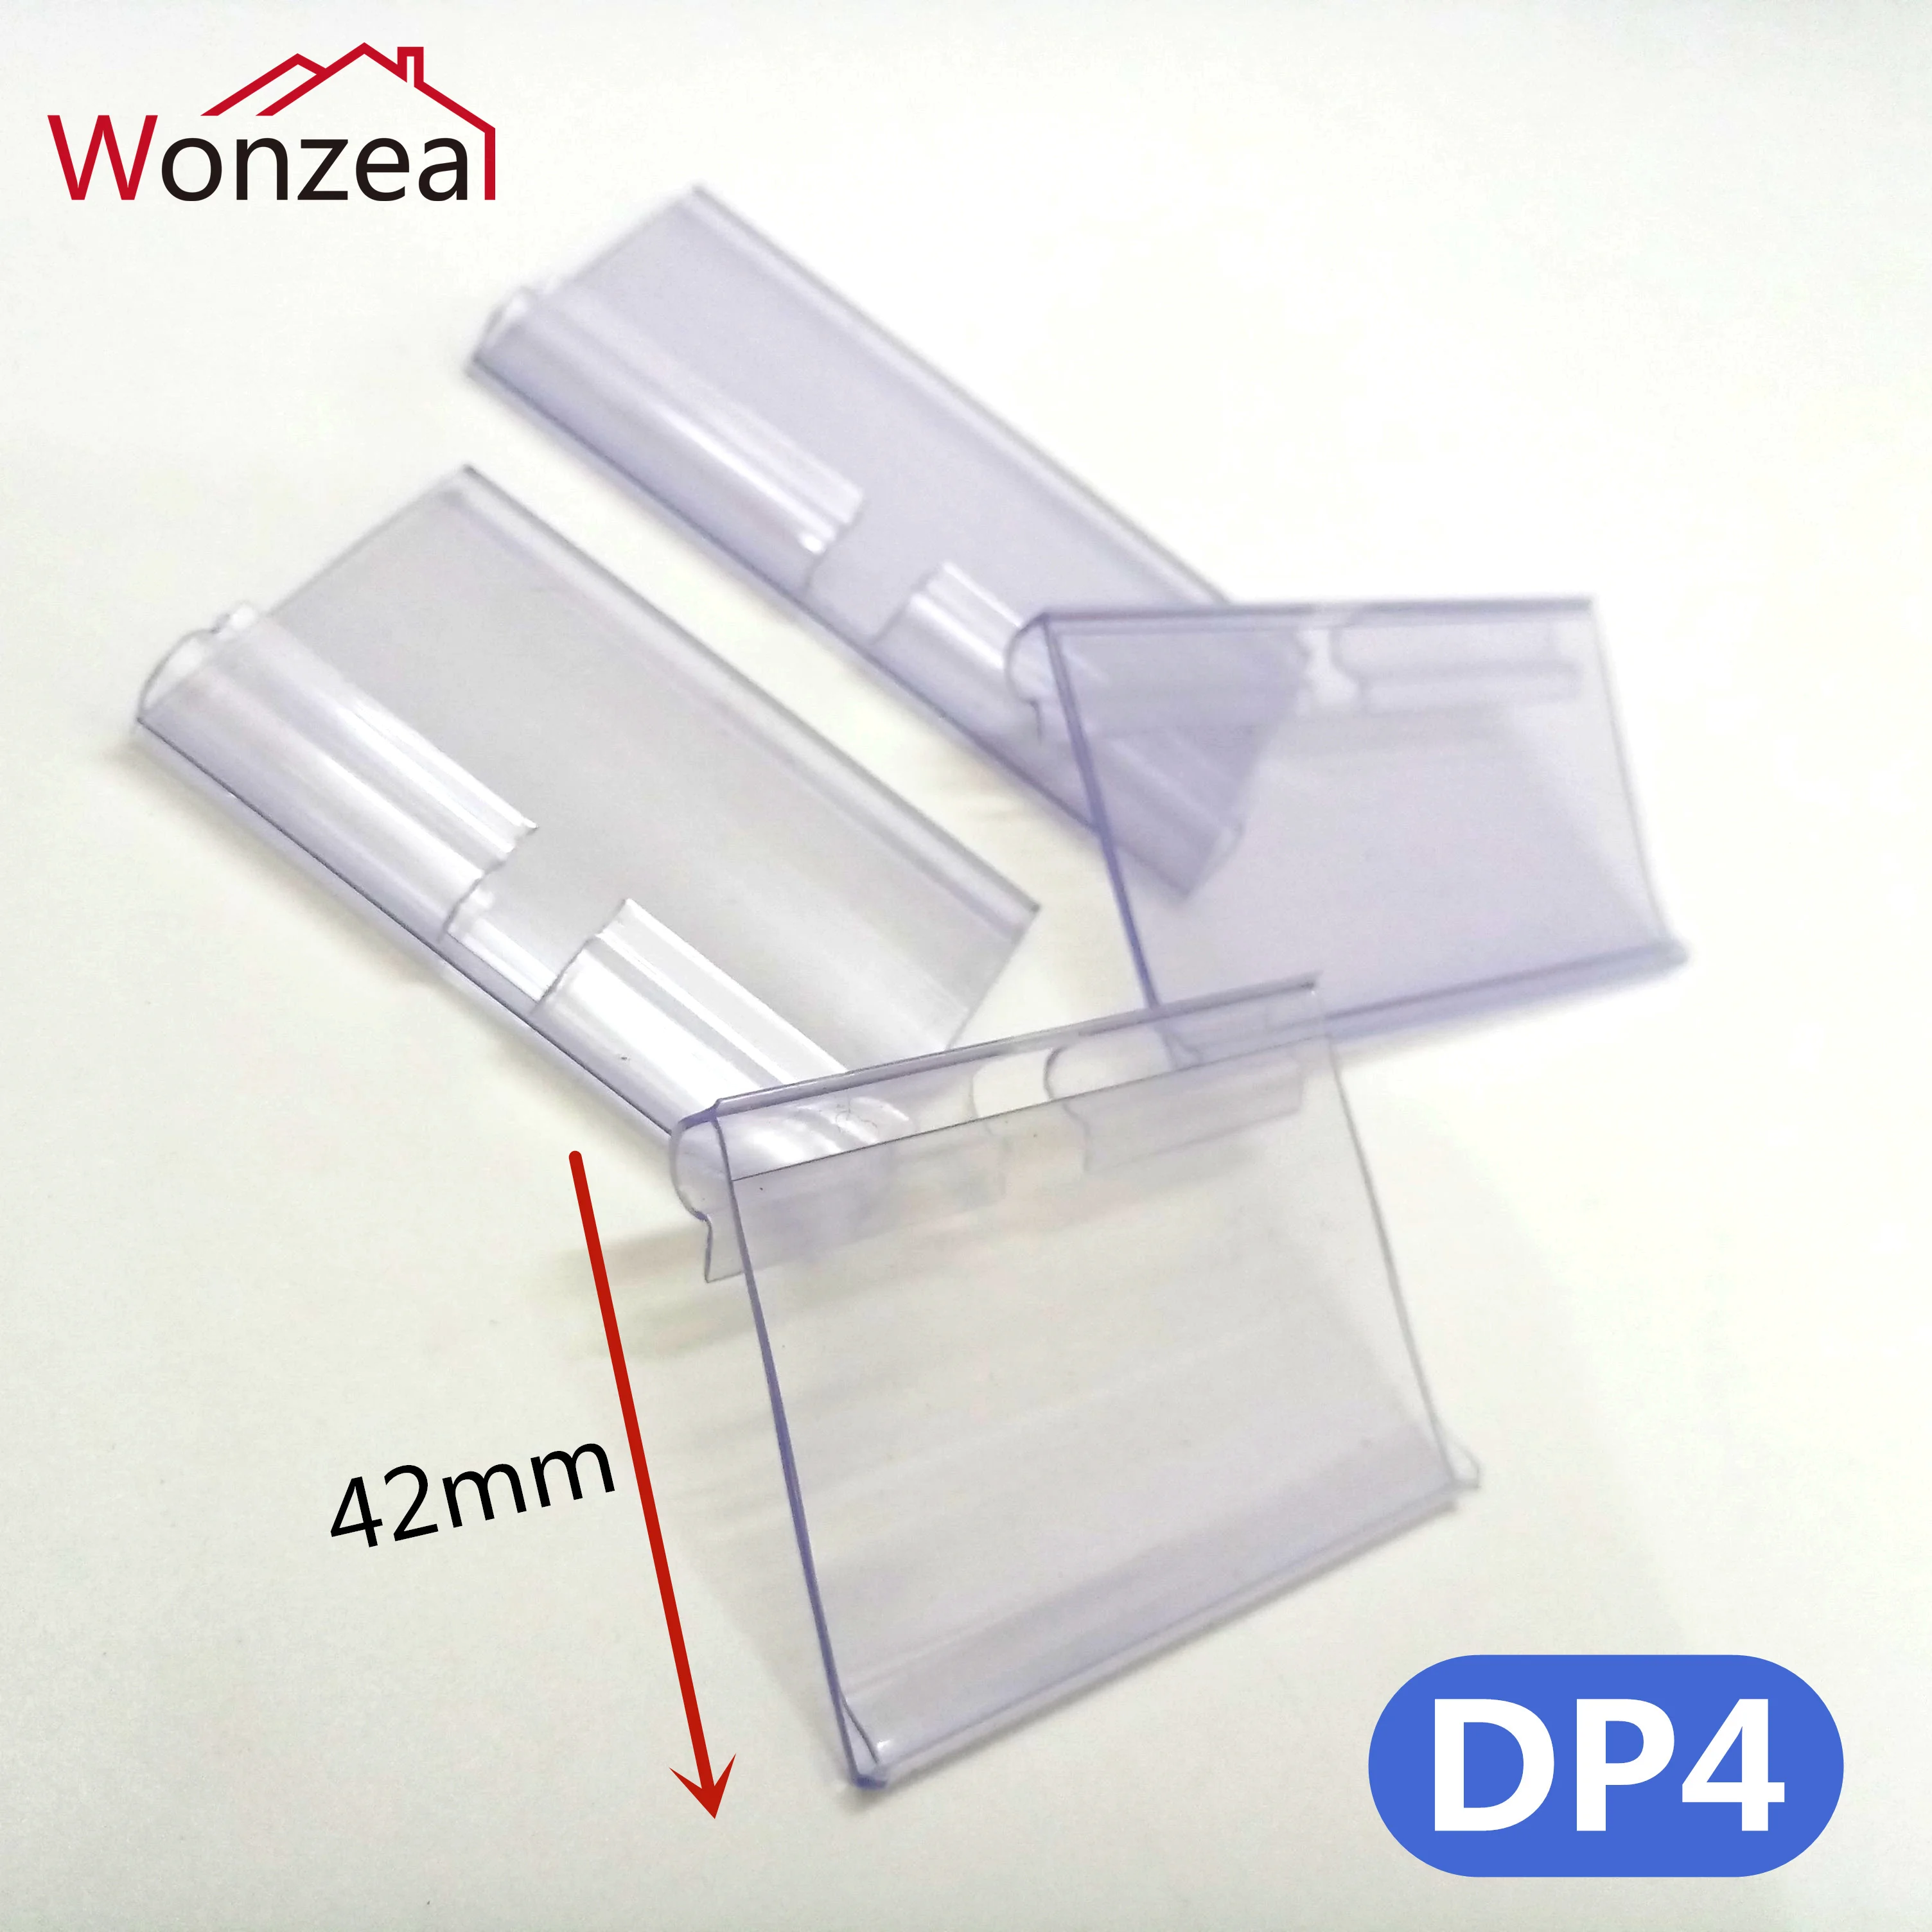 1pc Clear Plastic Label Holders Sign Display Holder Price For Retail U6Z0 